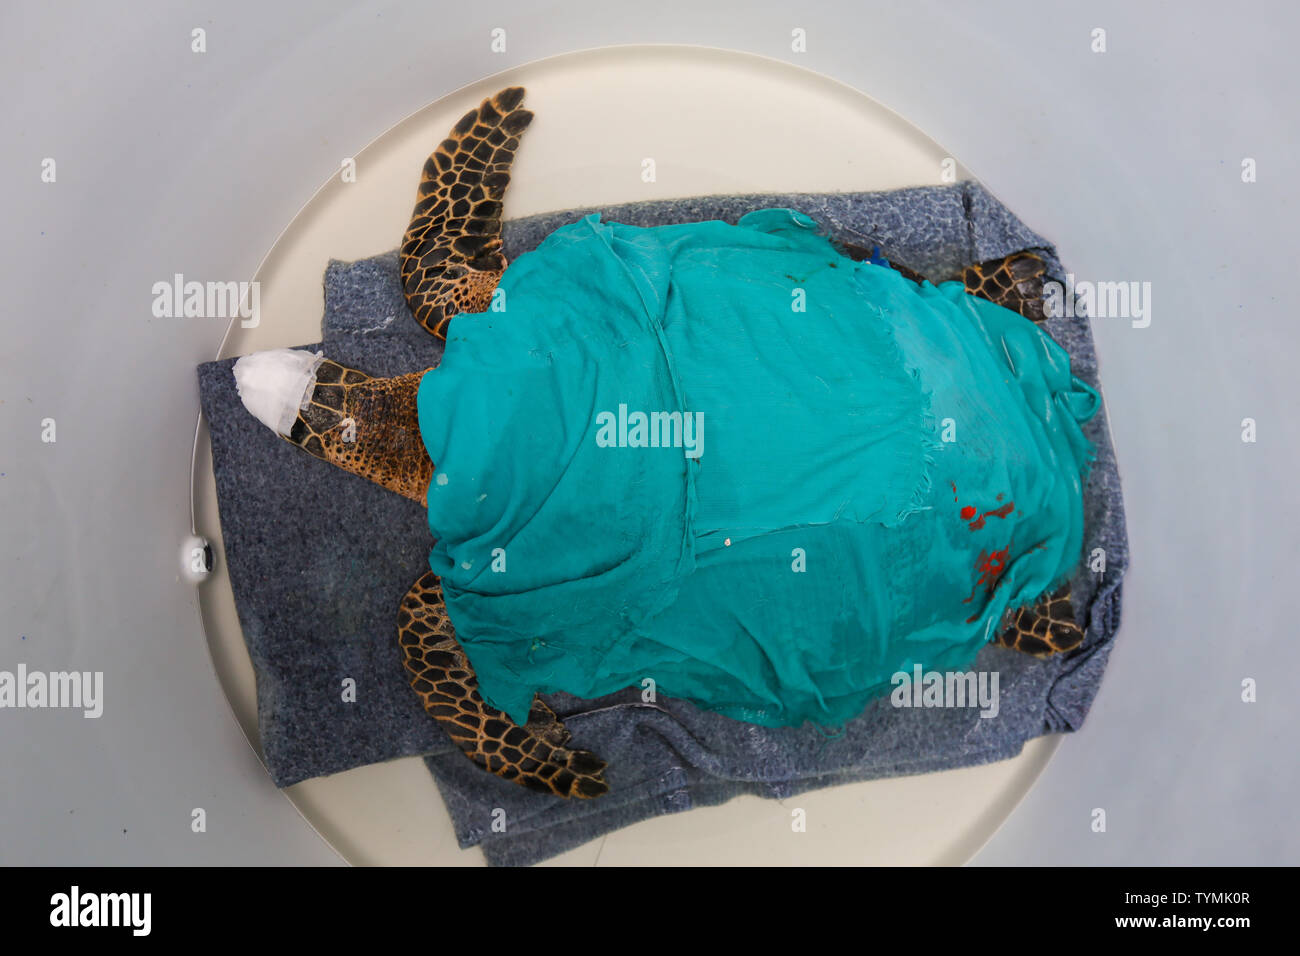 Helping and conserving sea turtles for release to nature. Stock Photo